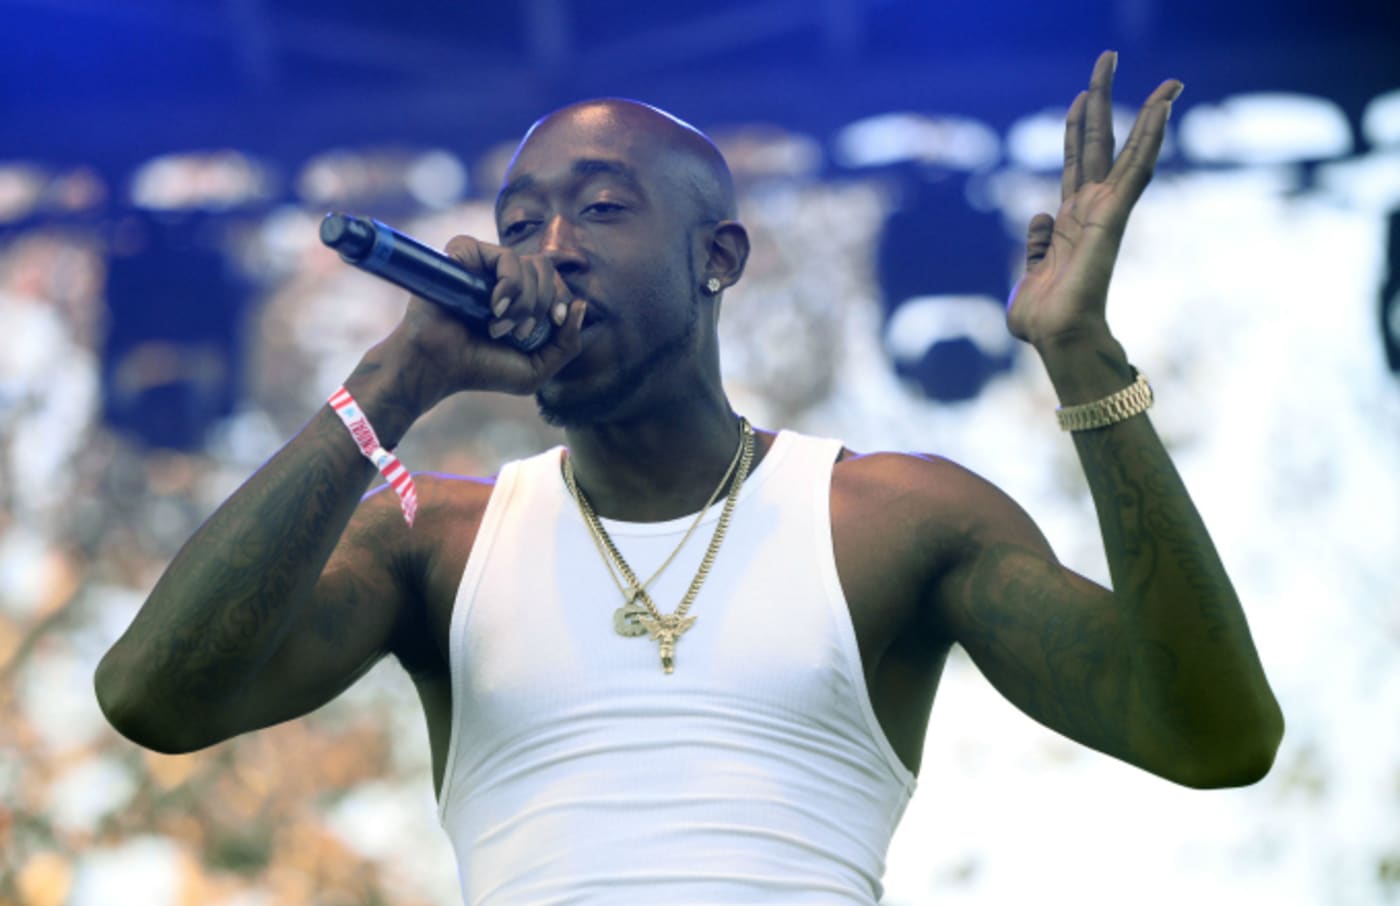 Rapper Freddie Gibbs performs onstage at the 3rd Annual Camp Flog Gnaw Carnival